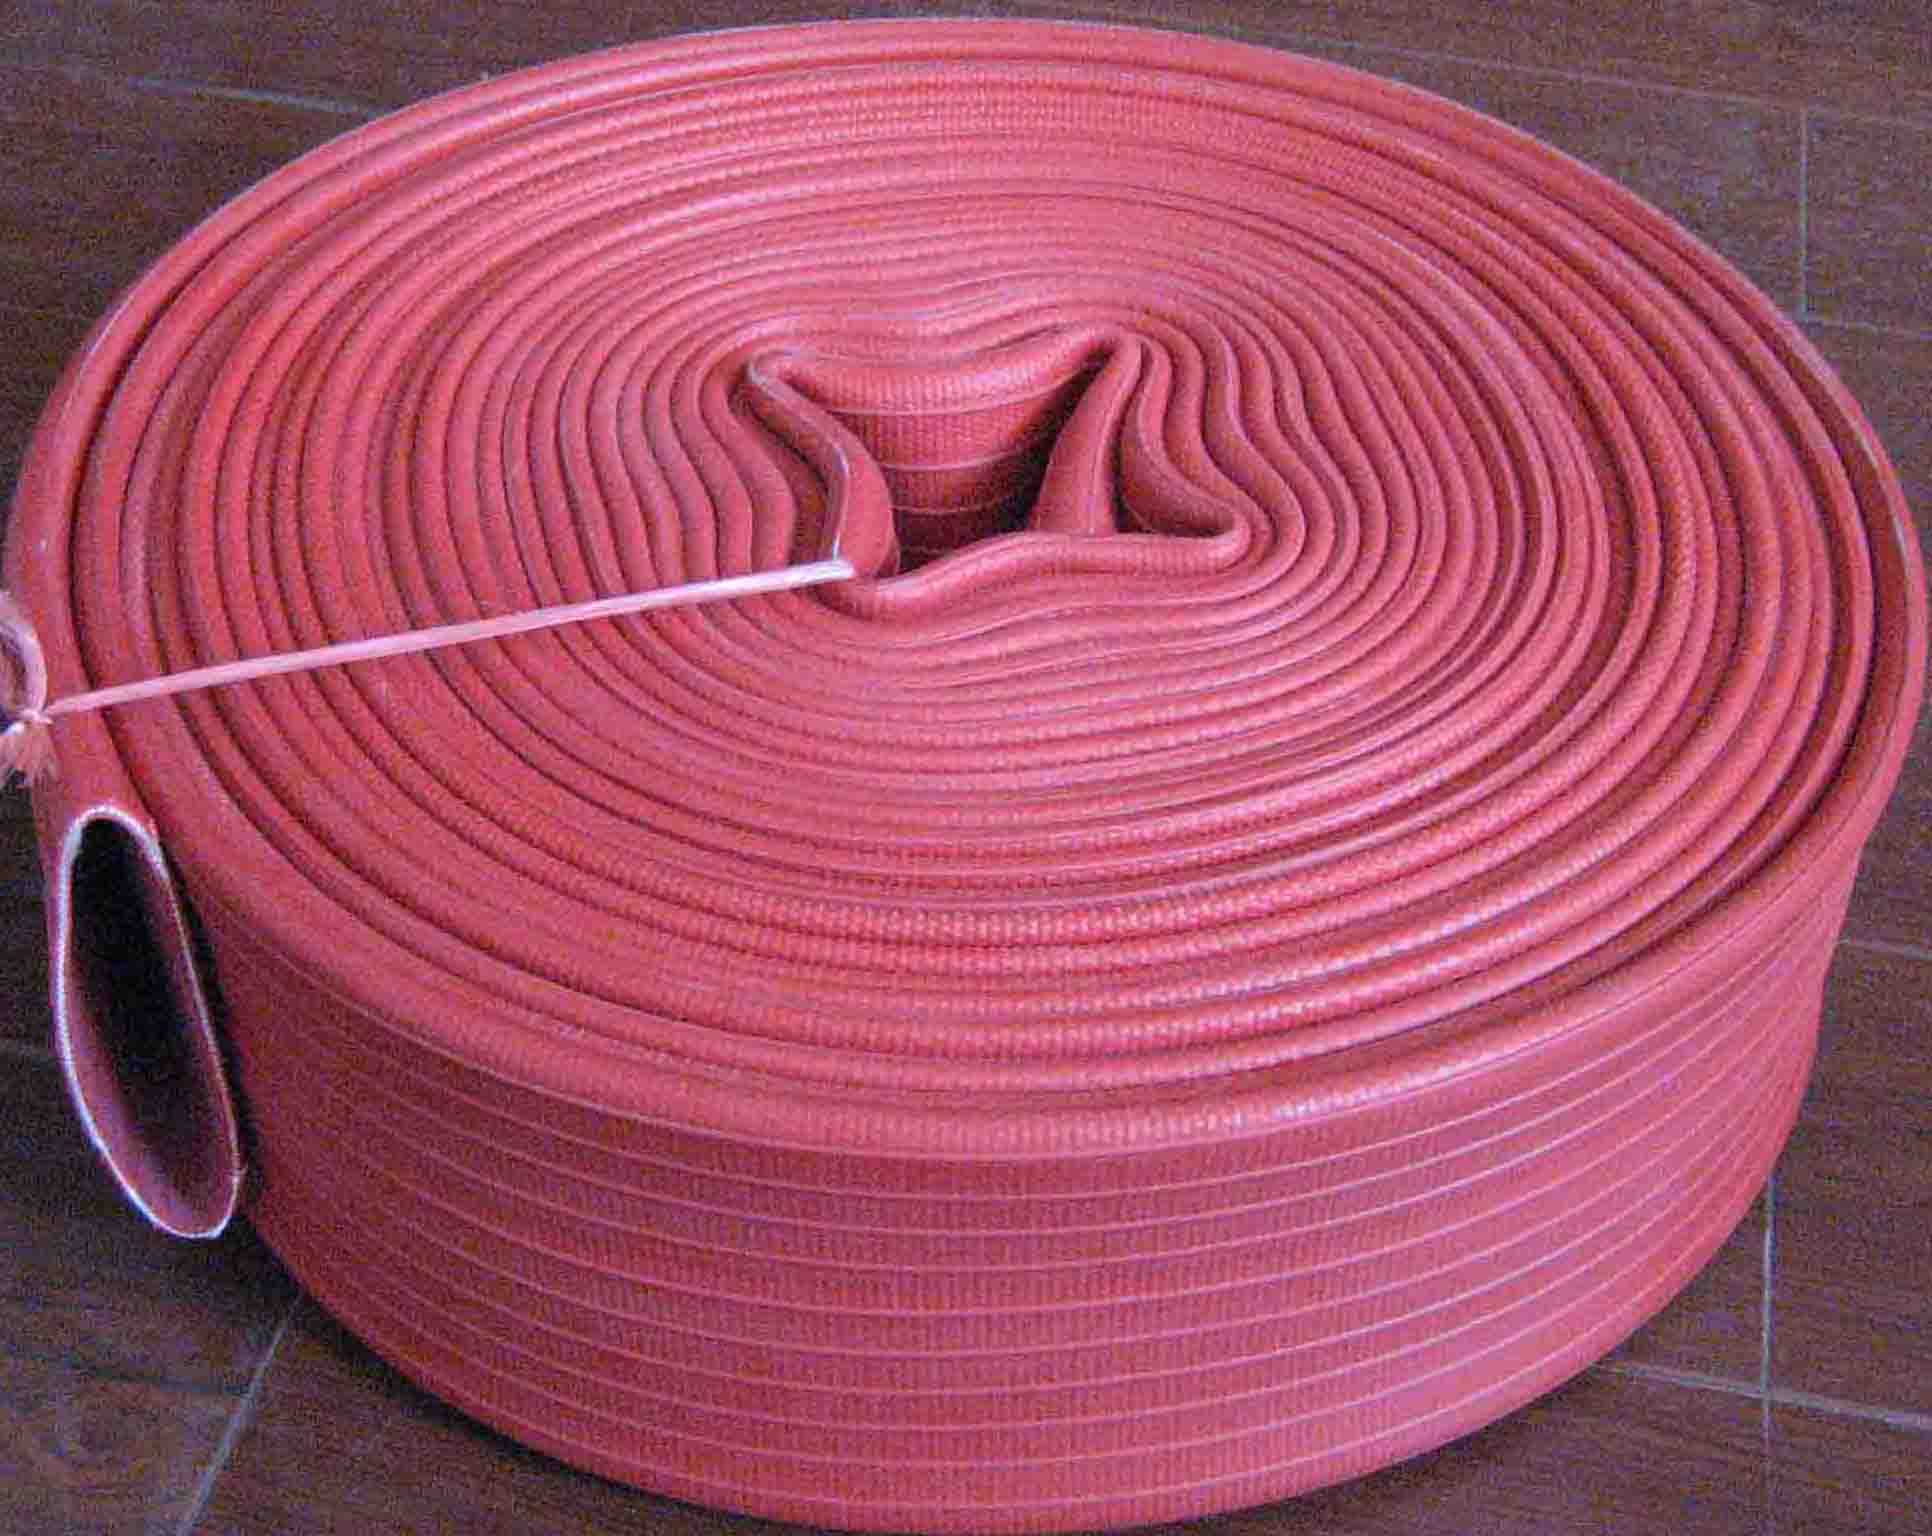 red rubber covered hose